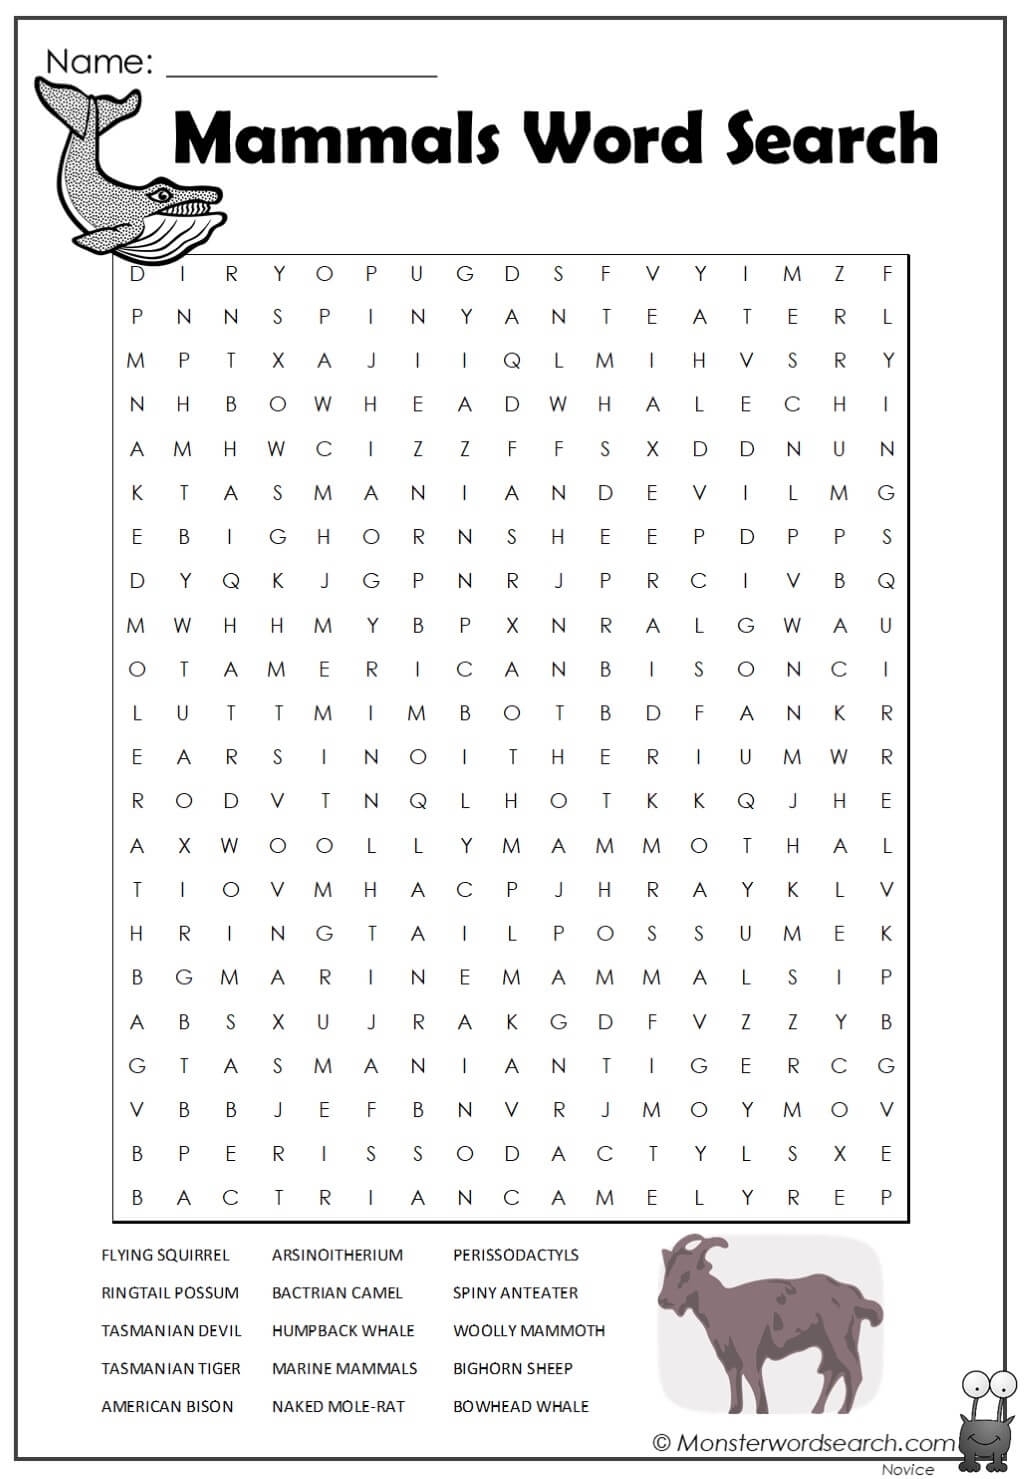 Mammals Word Search Printable - Word Search Printable